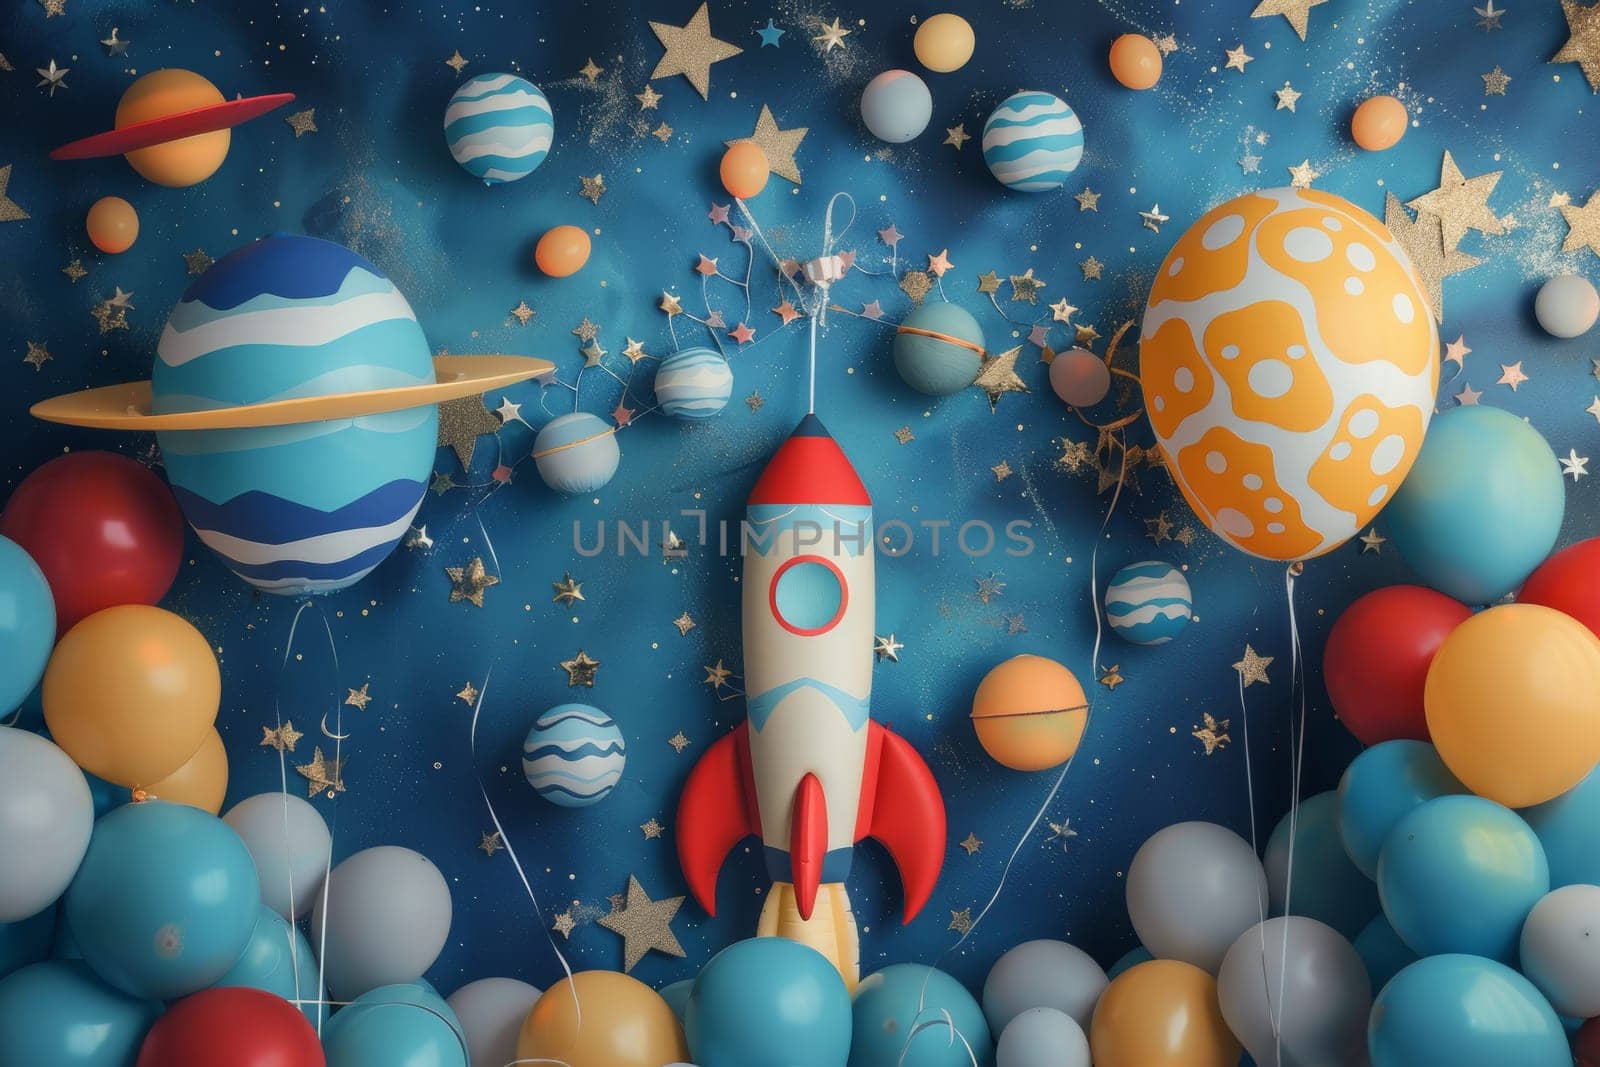 A colorful space scene with a rocket in the middle. The rocket is surrounded by many balloons and stars. The scene is bright and cheerful, with a sense of adventure and exploration